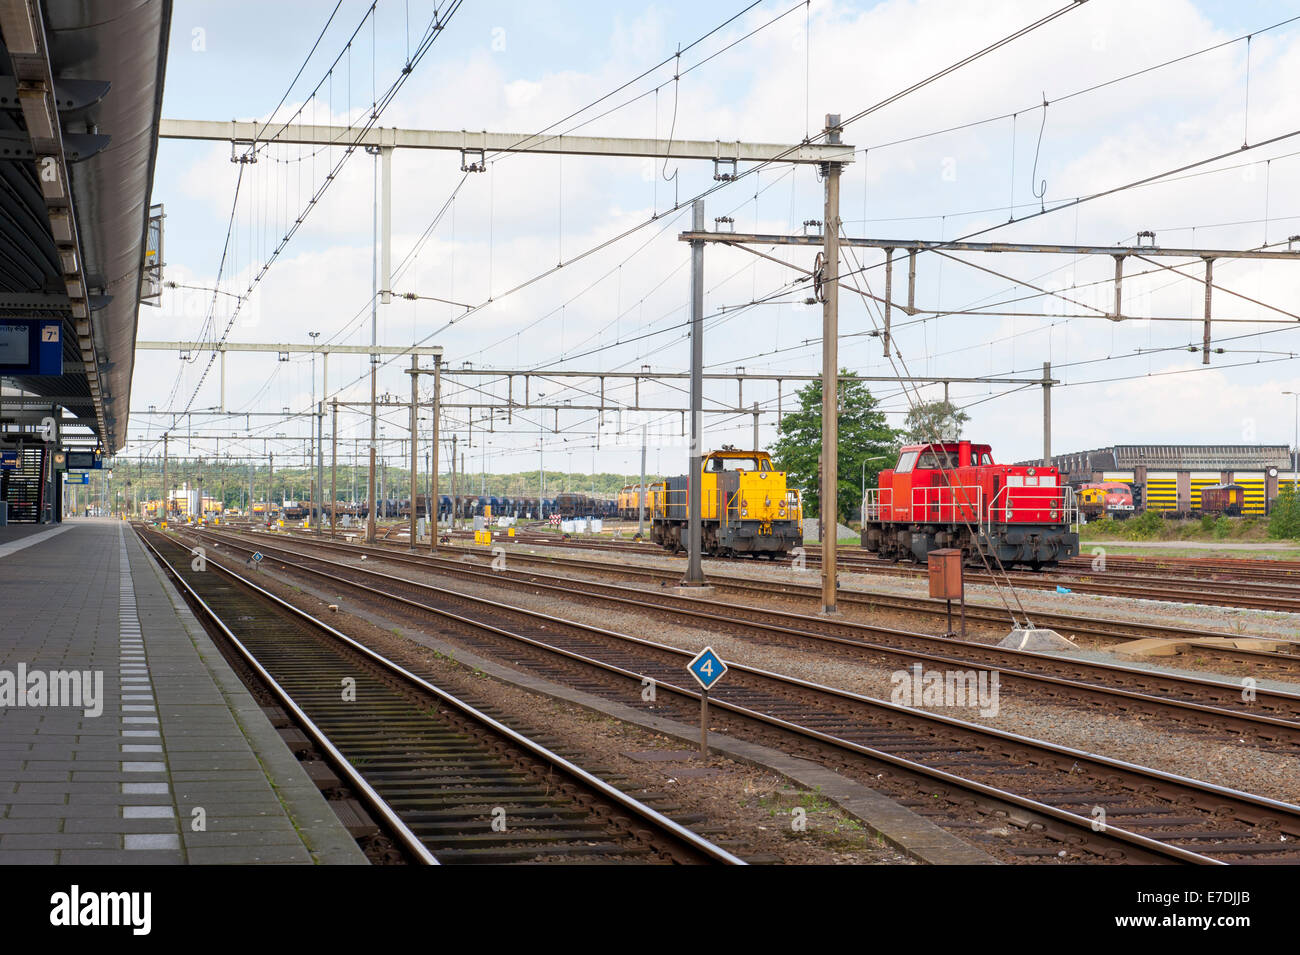 Platform with railway tracks and red and yellow cargo locomotives Stock Photo